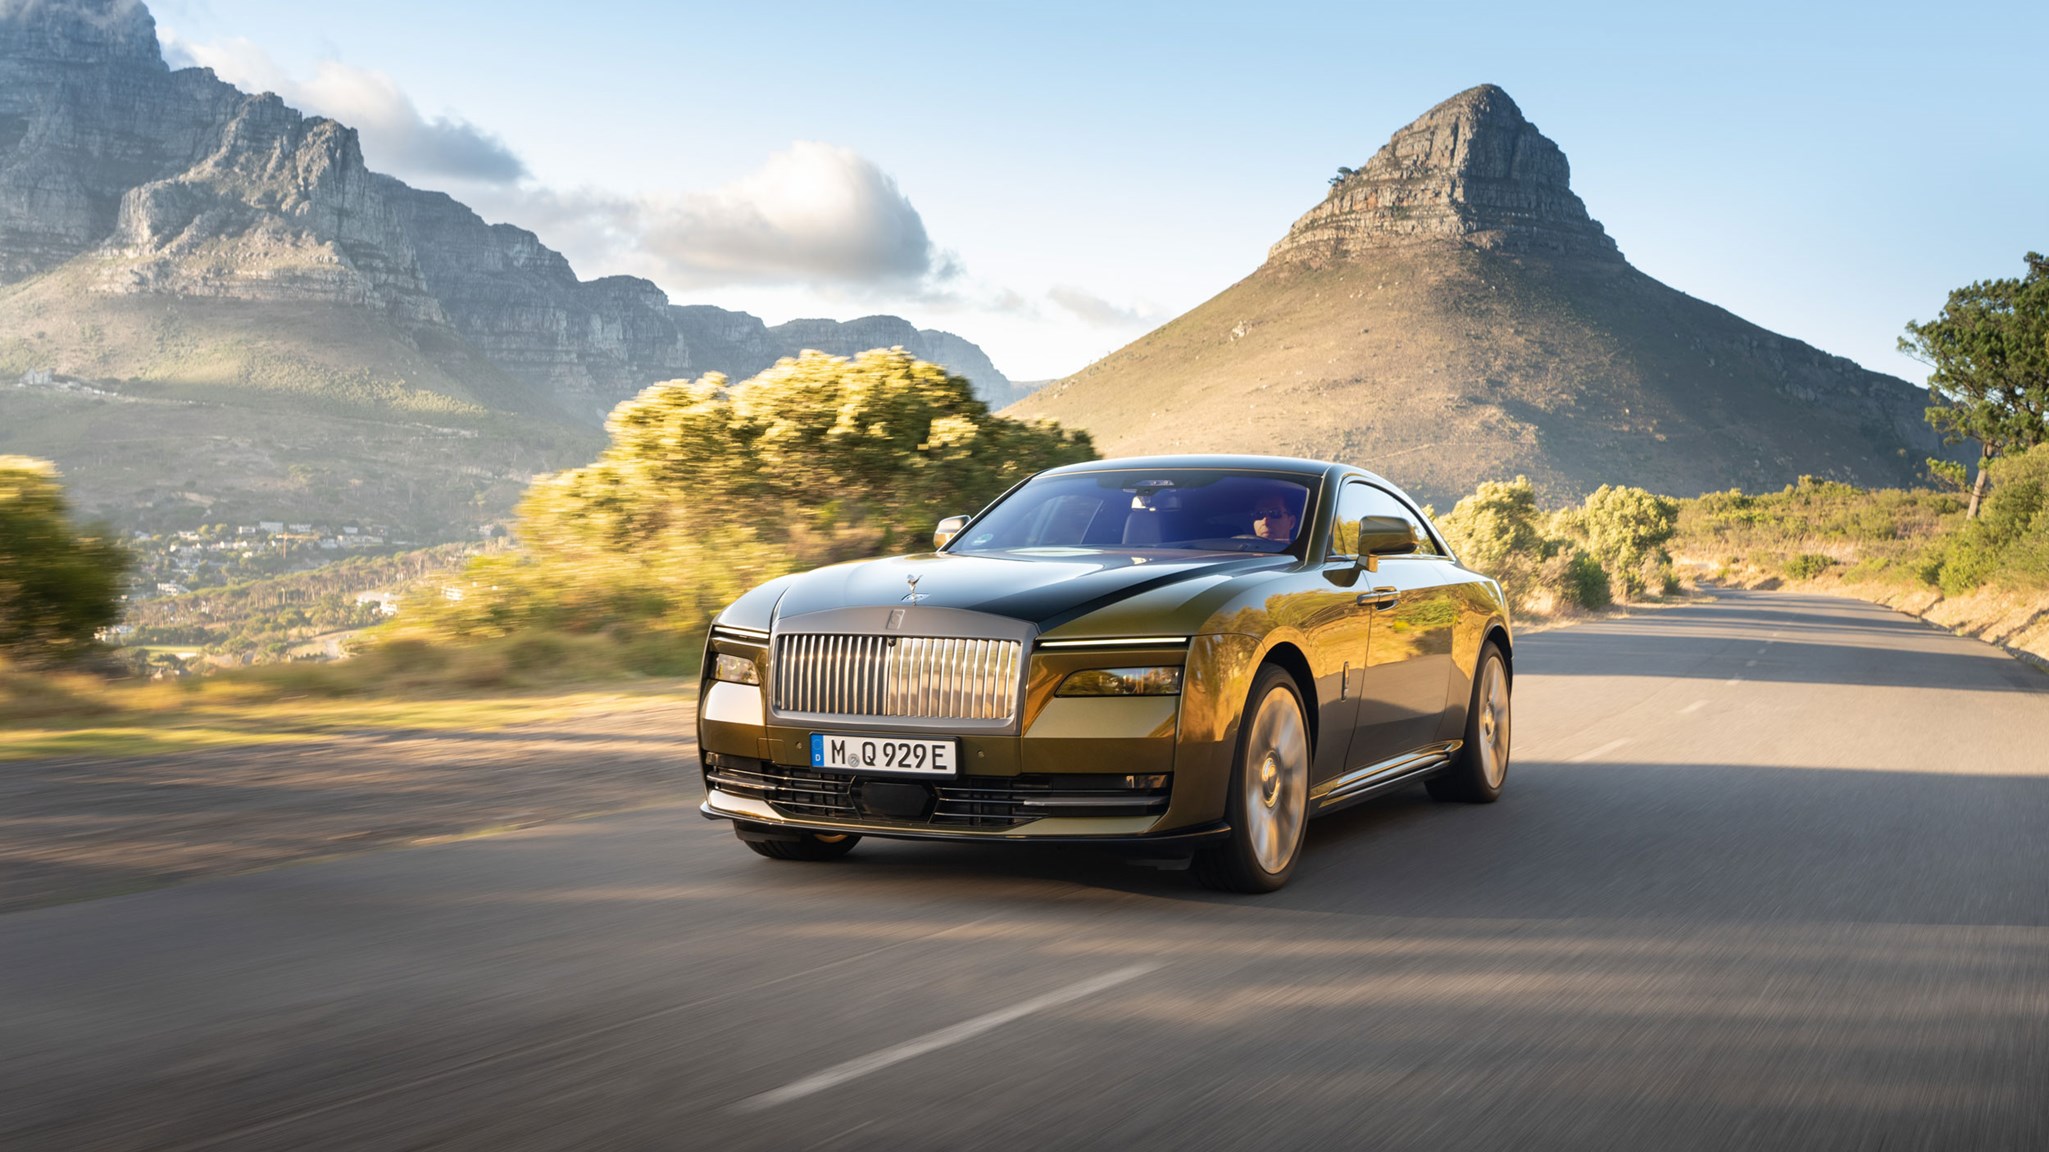 THE EXTRAORDINARY UNDERTAKING IS COMPLETE ROLLSROYCE SPECTRE CONCLUDES  GLOBAL TESTING PROGRAMME WITH METICULOUS LIFESTYLE ANALYSIS